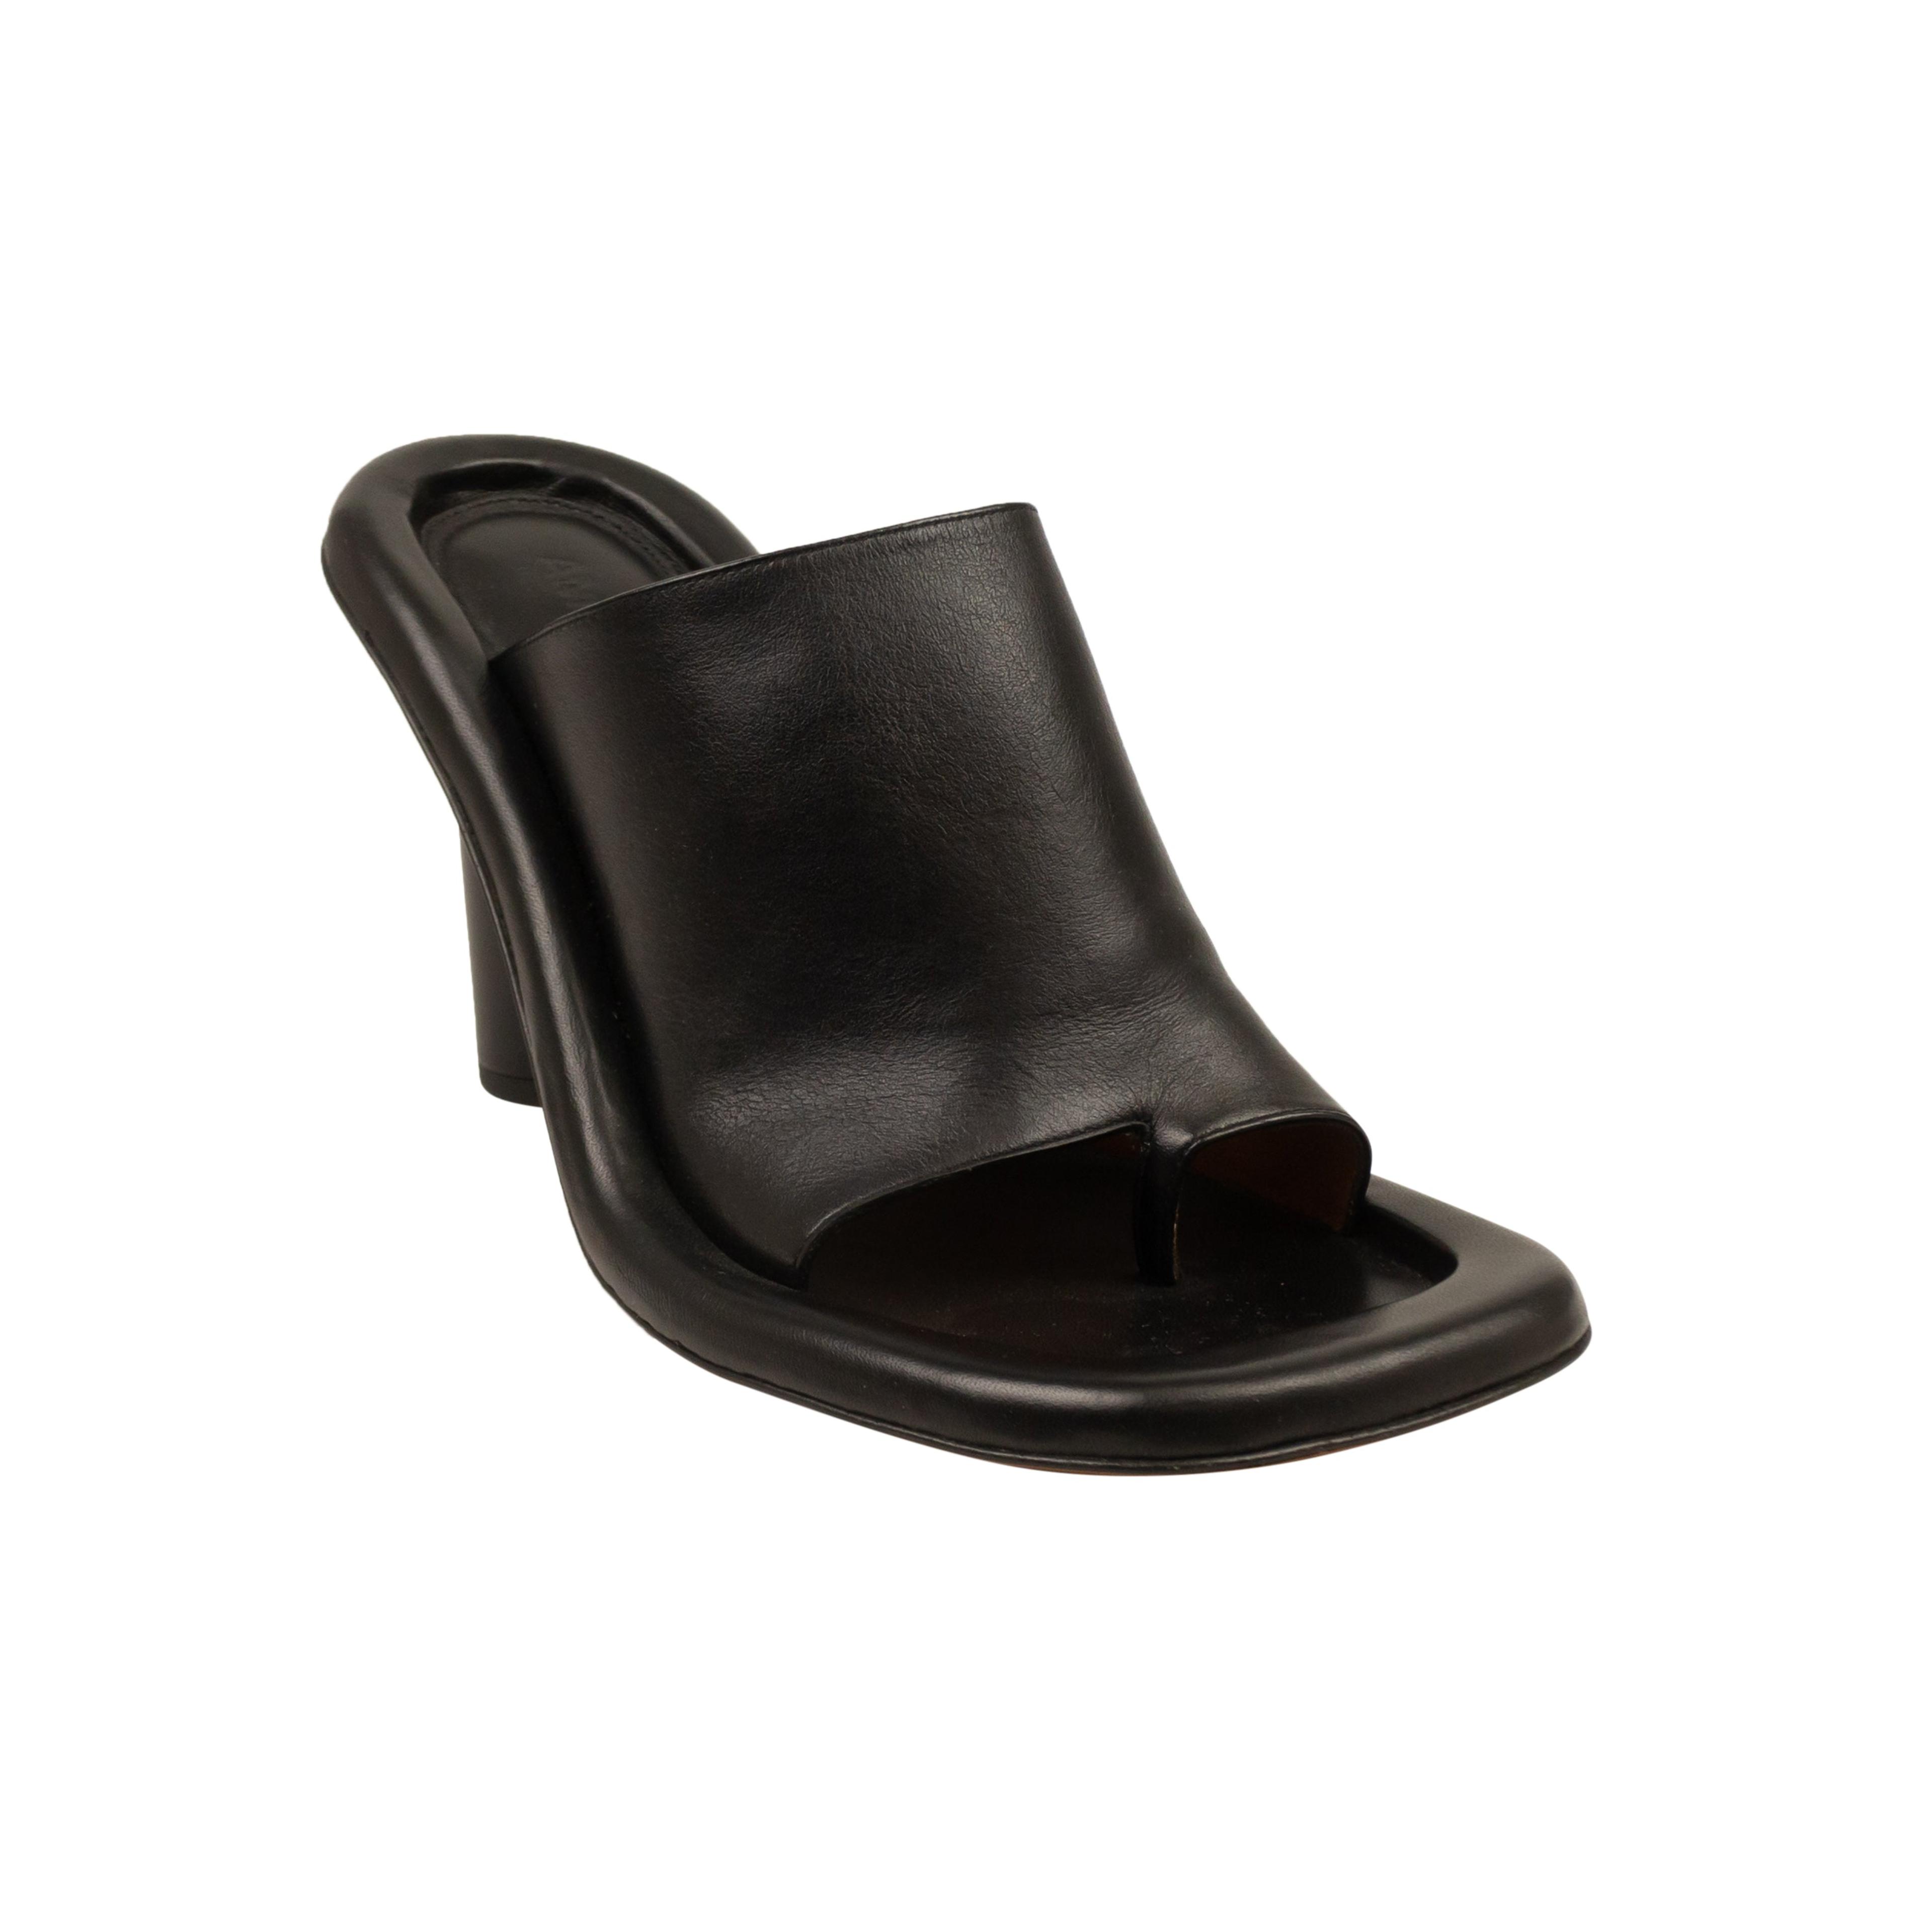 Alternate View 1 of Black Leather Cushion Slip On Mule Pumps